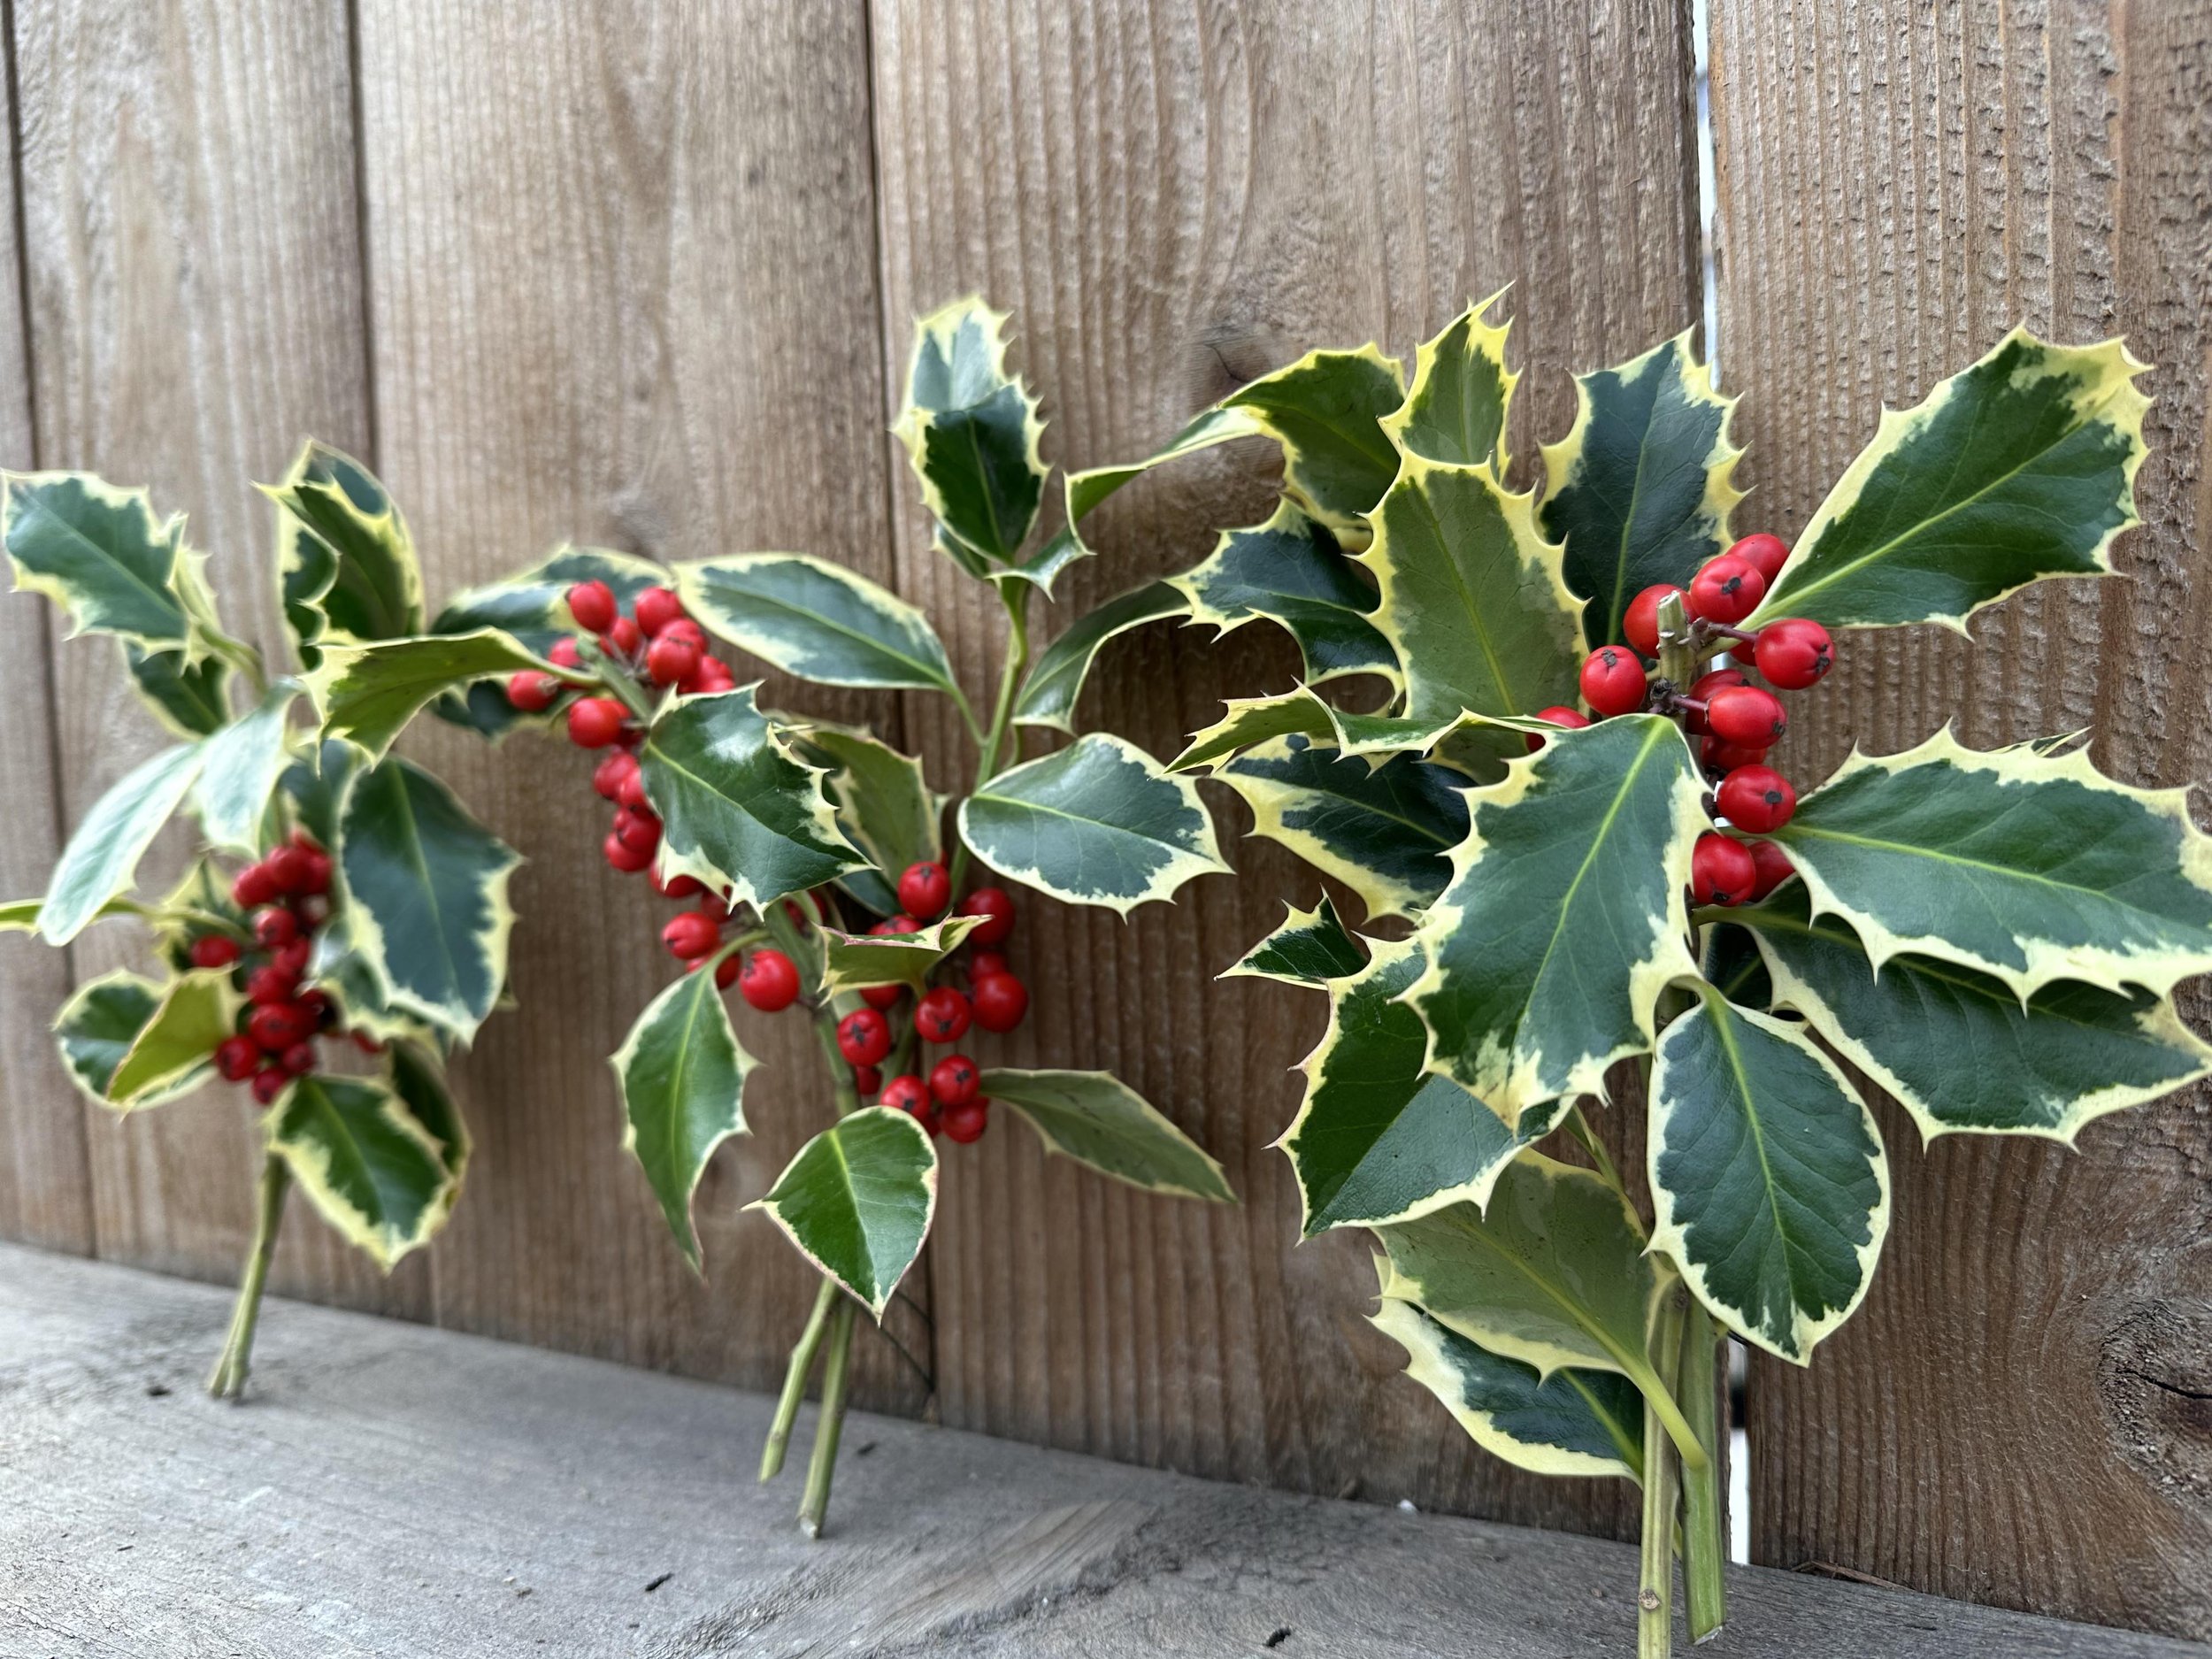 variegated holly bunches from the side2.jpg